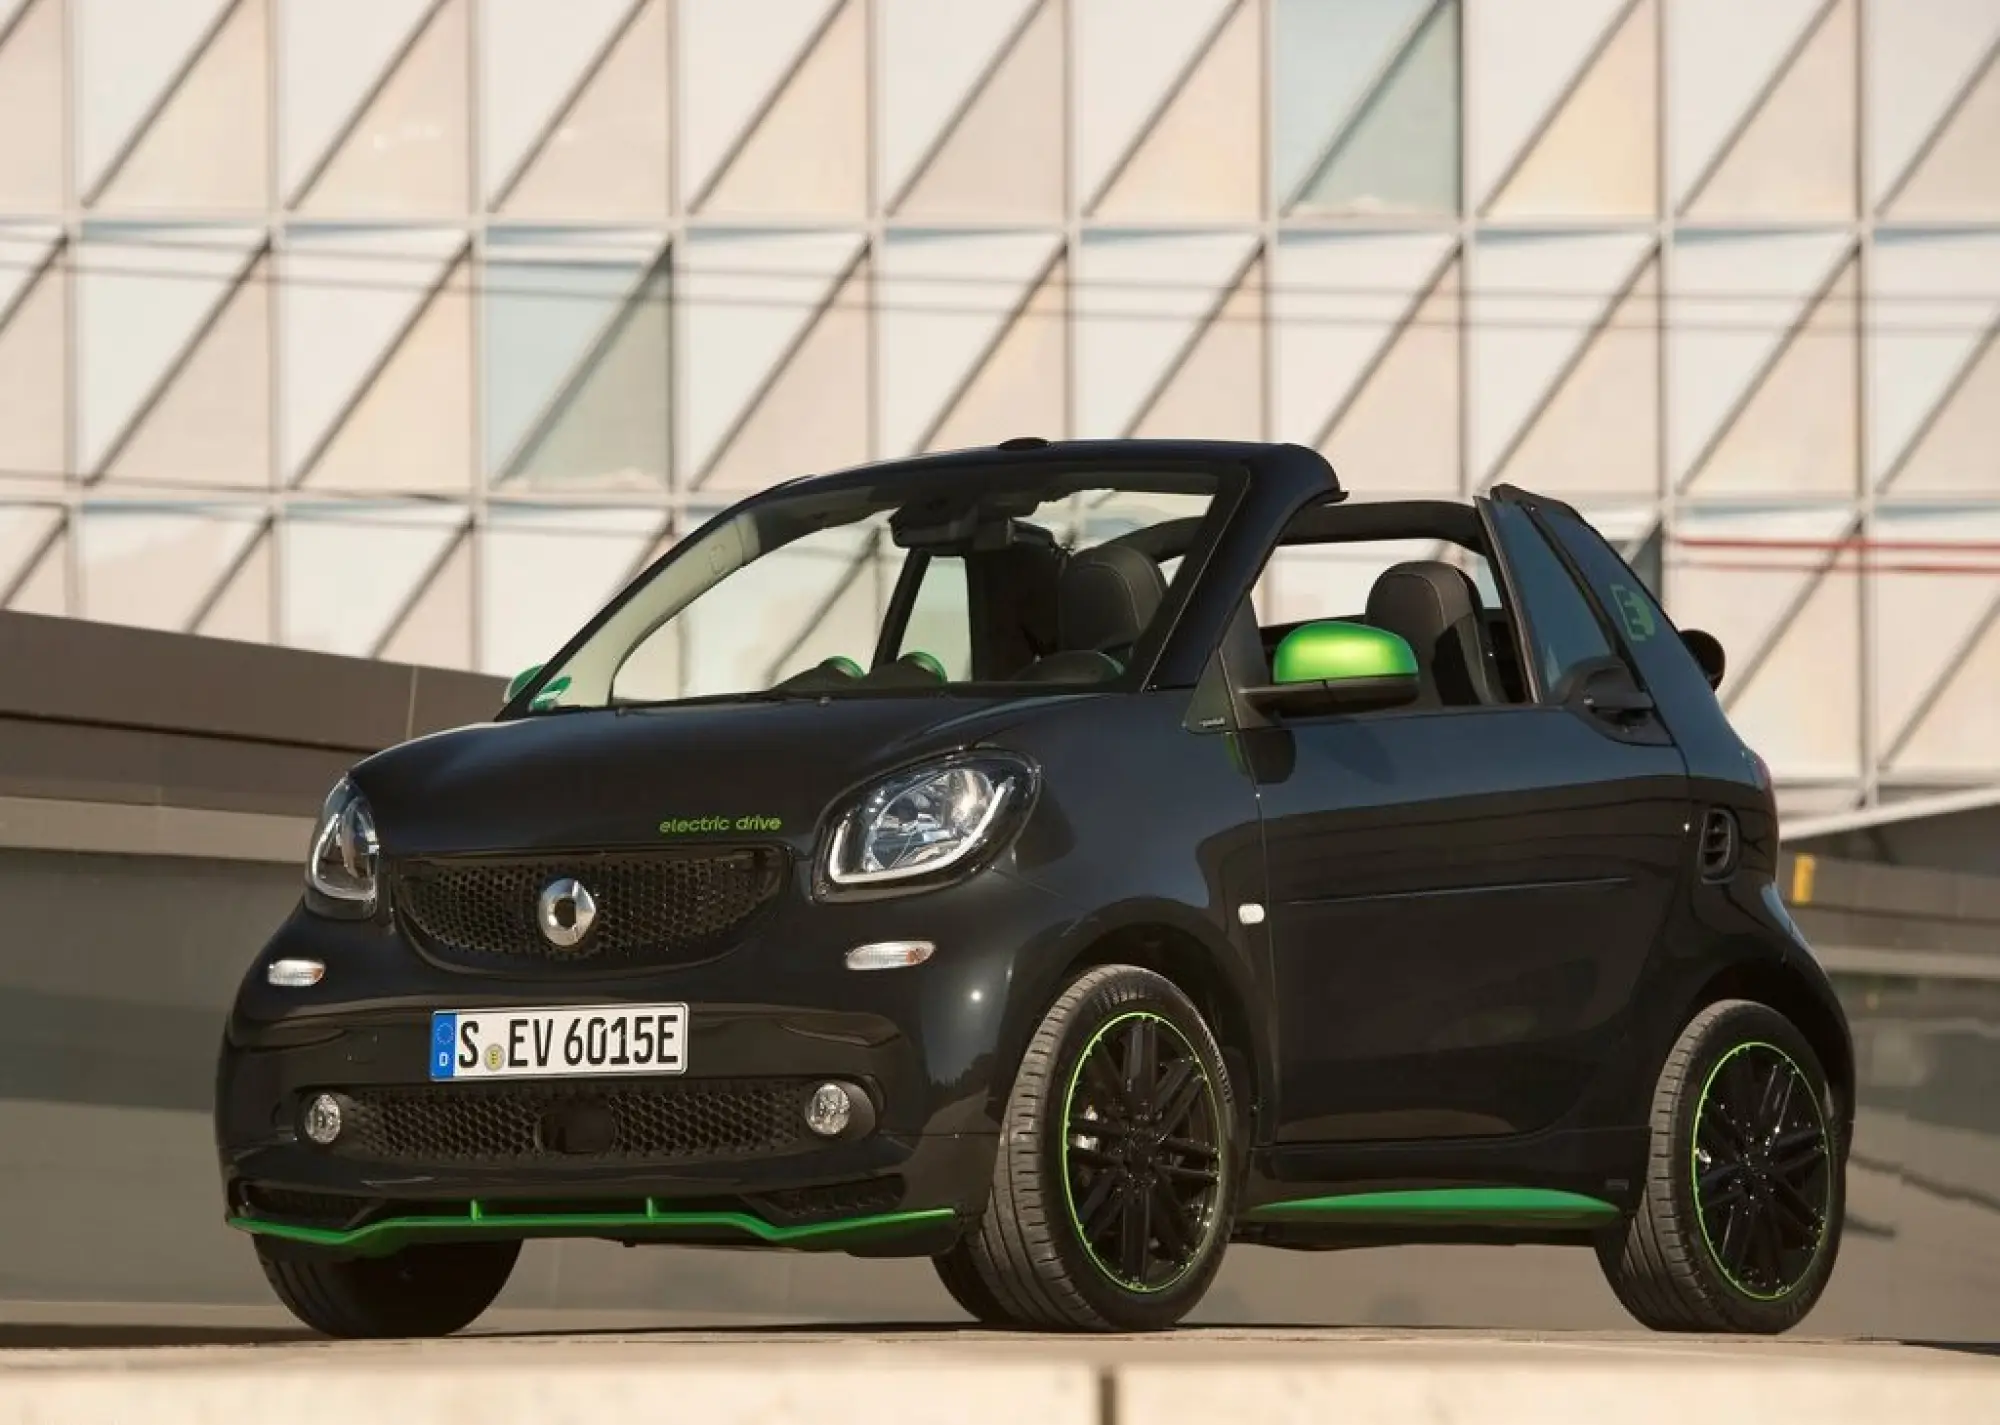 Smart fortwo electric drive - Roadshow 2017 - 5